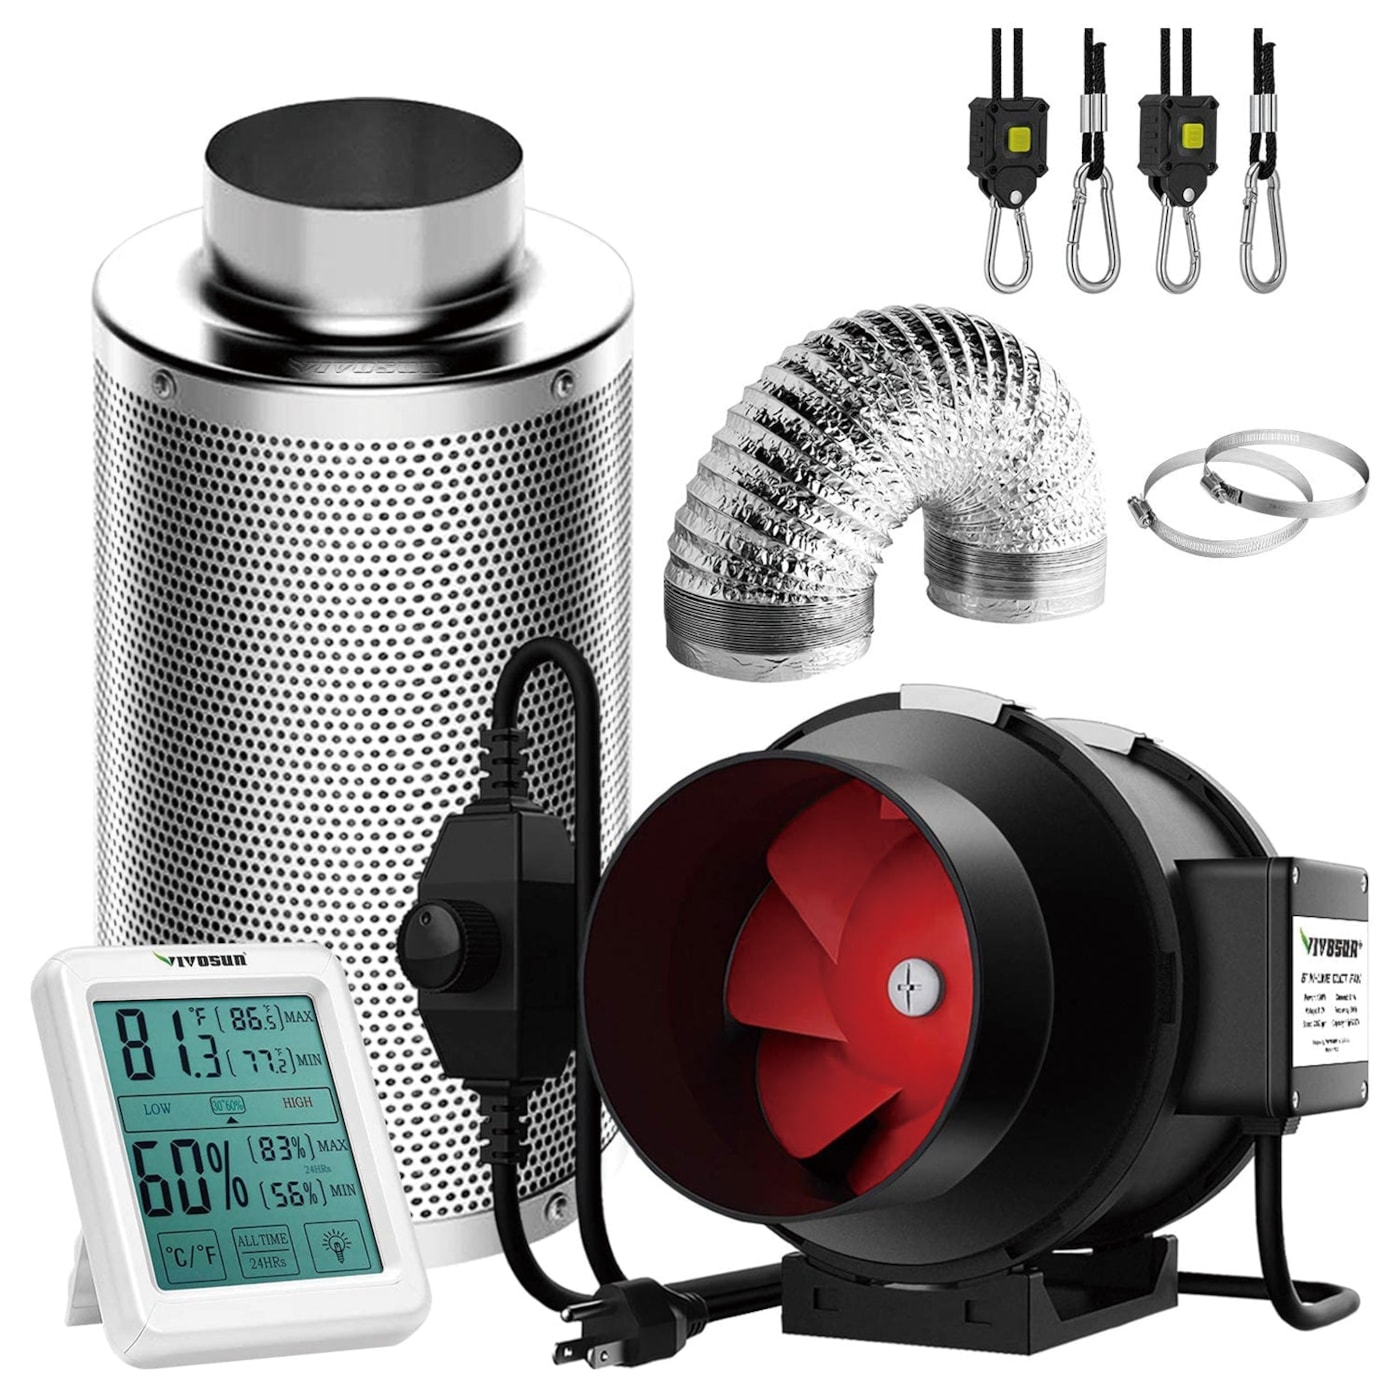 VIVOSUN 6-Inch 390 CFM Inline Duct Fan Kit with Carbon Filter, Thermometer, and Ducting